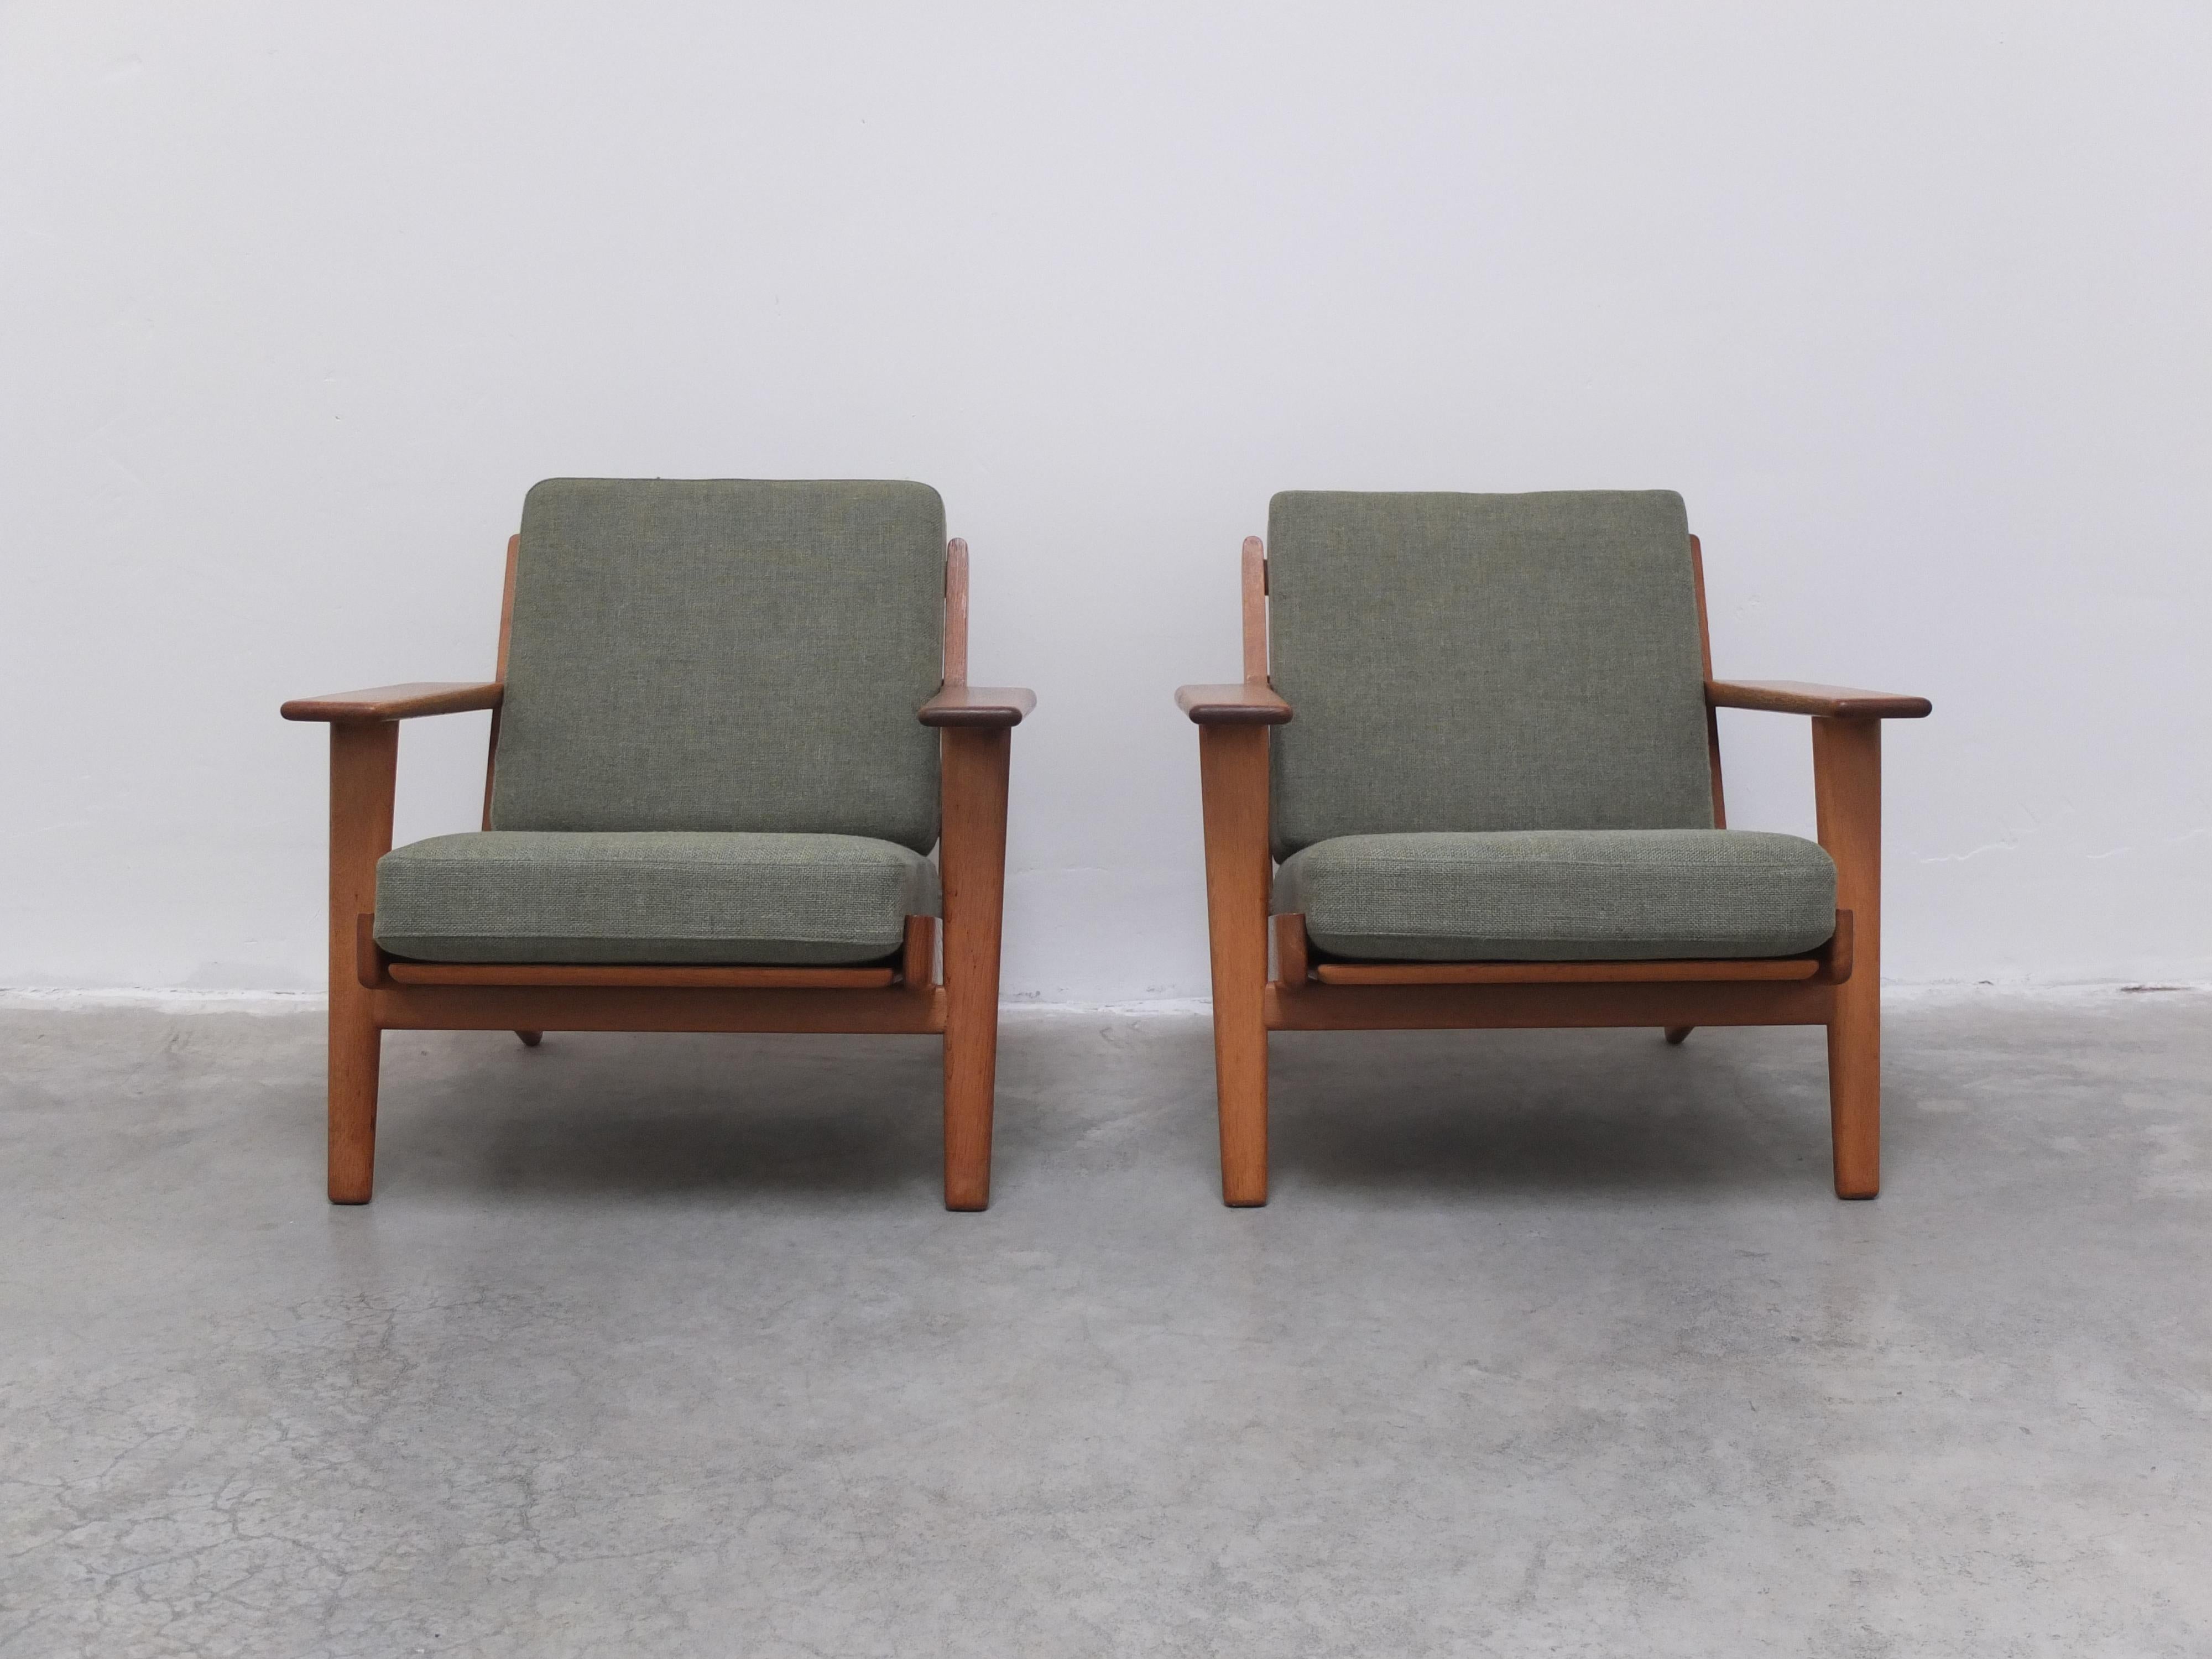 Straight from Denmark comes this original pair of lounge chairs designed in 1953 by the master himself, Hans J. Wegner. This is model ‘GE-290’ with solid oak frames and the original green spring cushions. The oak has a wonderful patina thanks to age